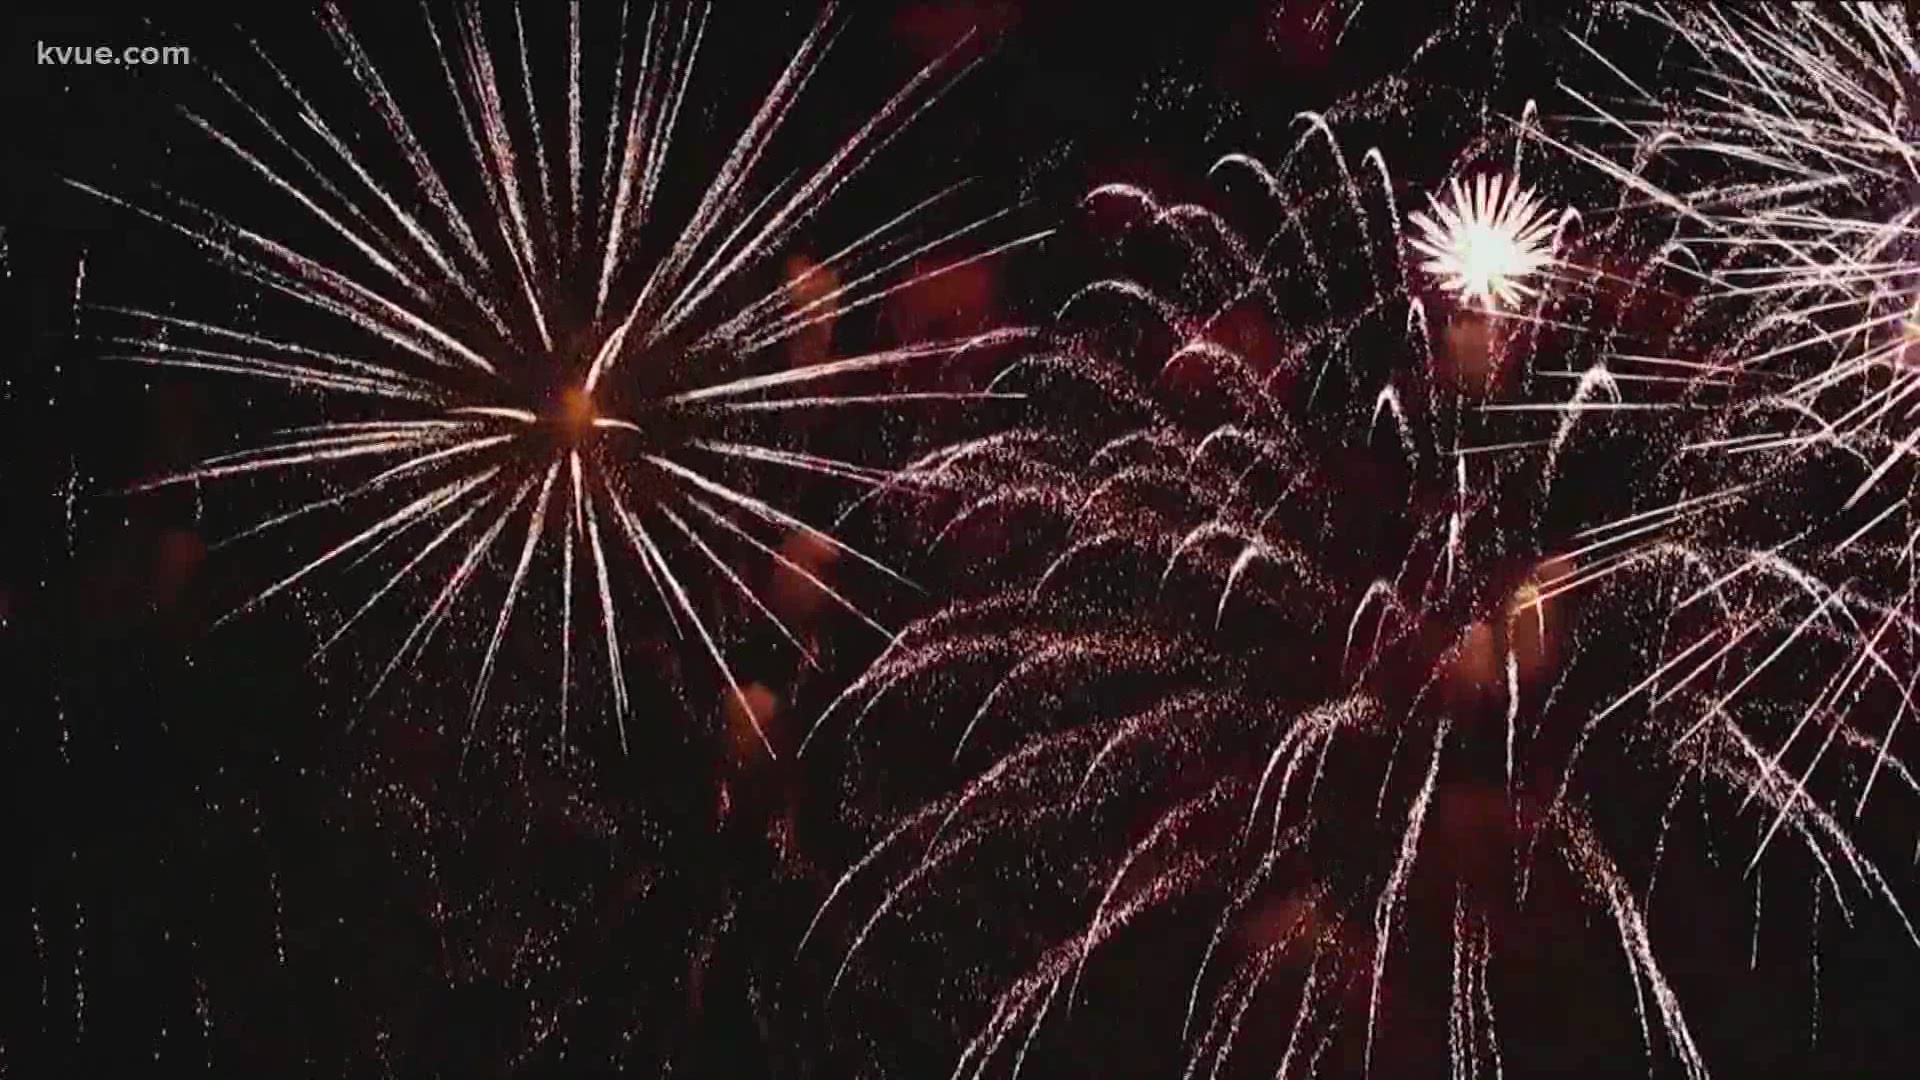 Coronavirus us changing the way many of us will celebrate the Fourth of July this year. Most firework displays are canceled.